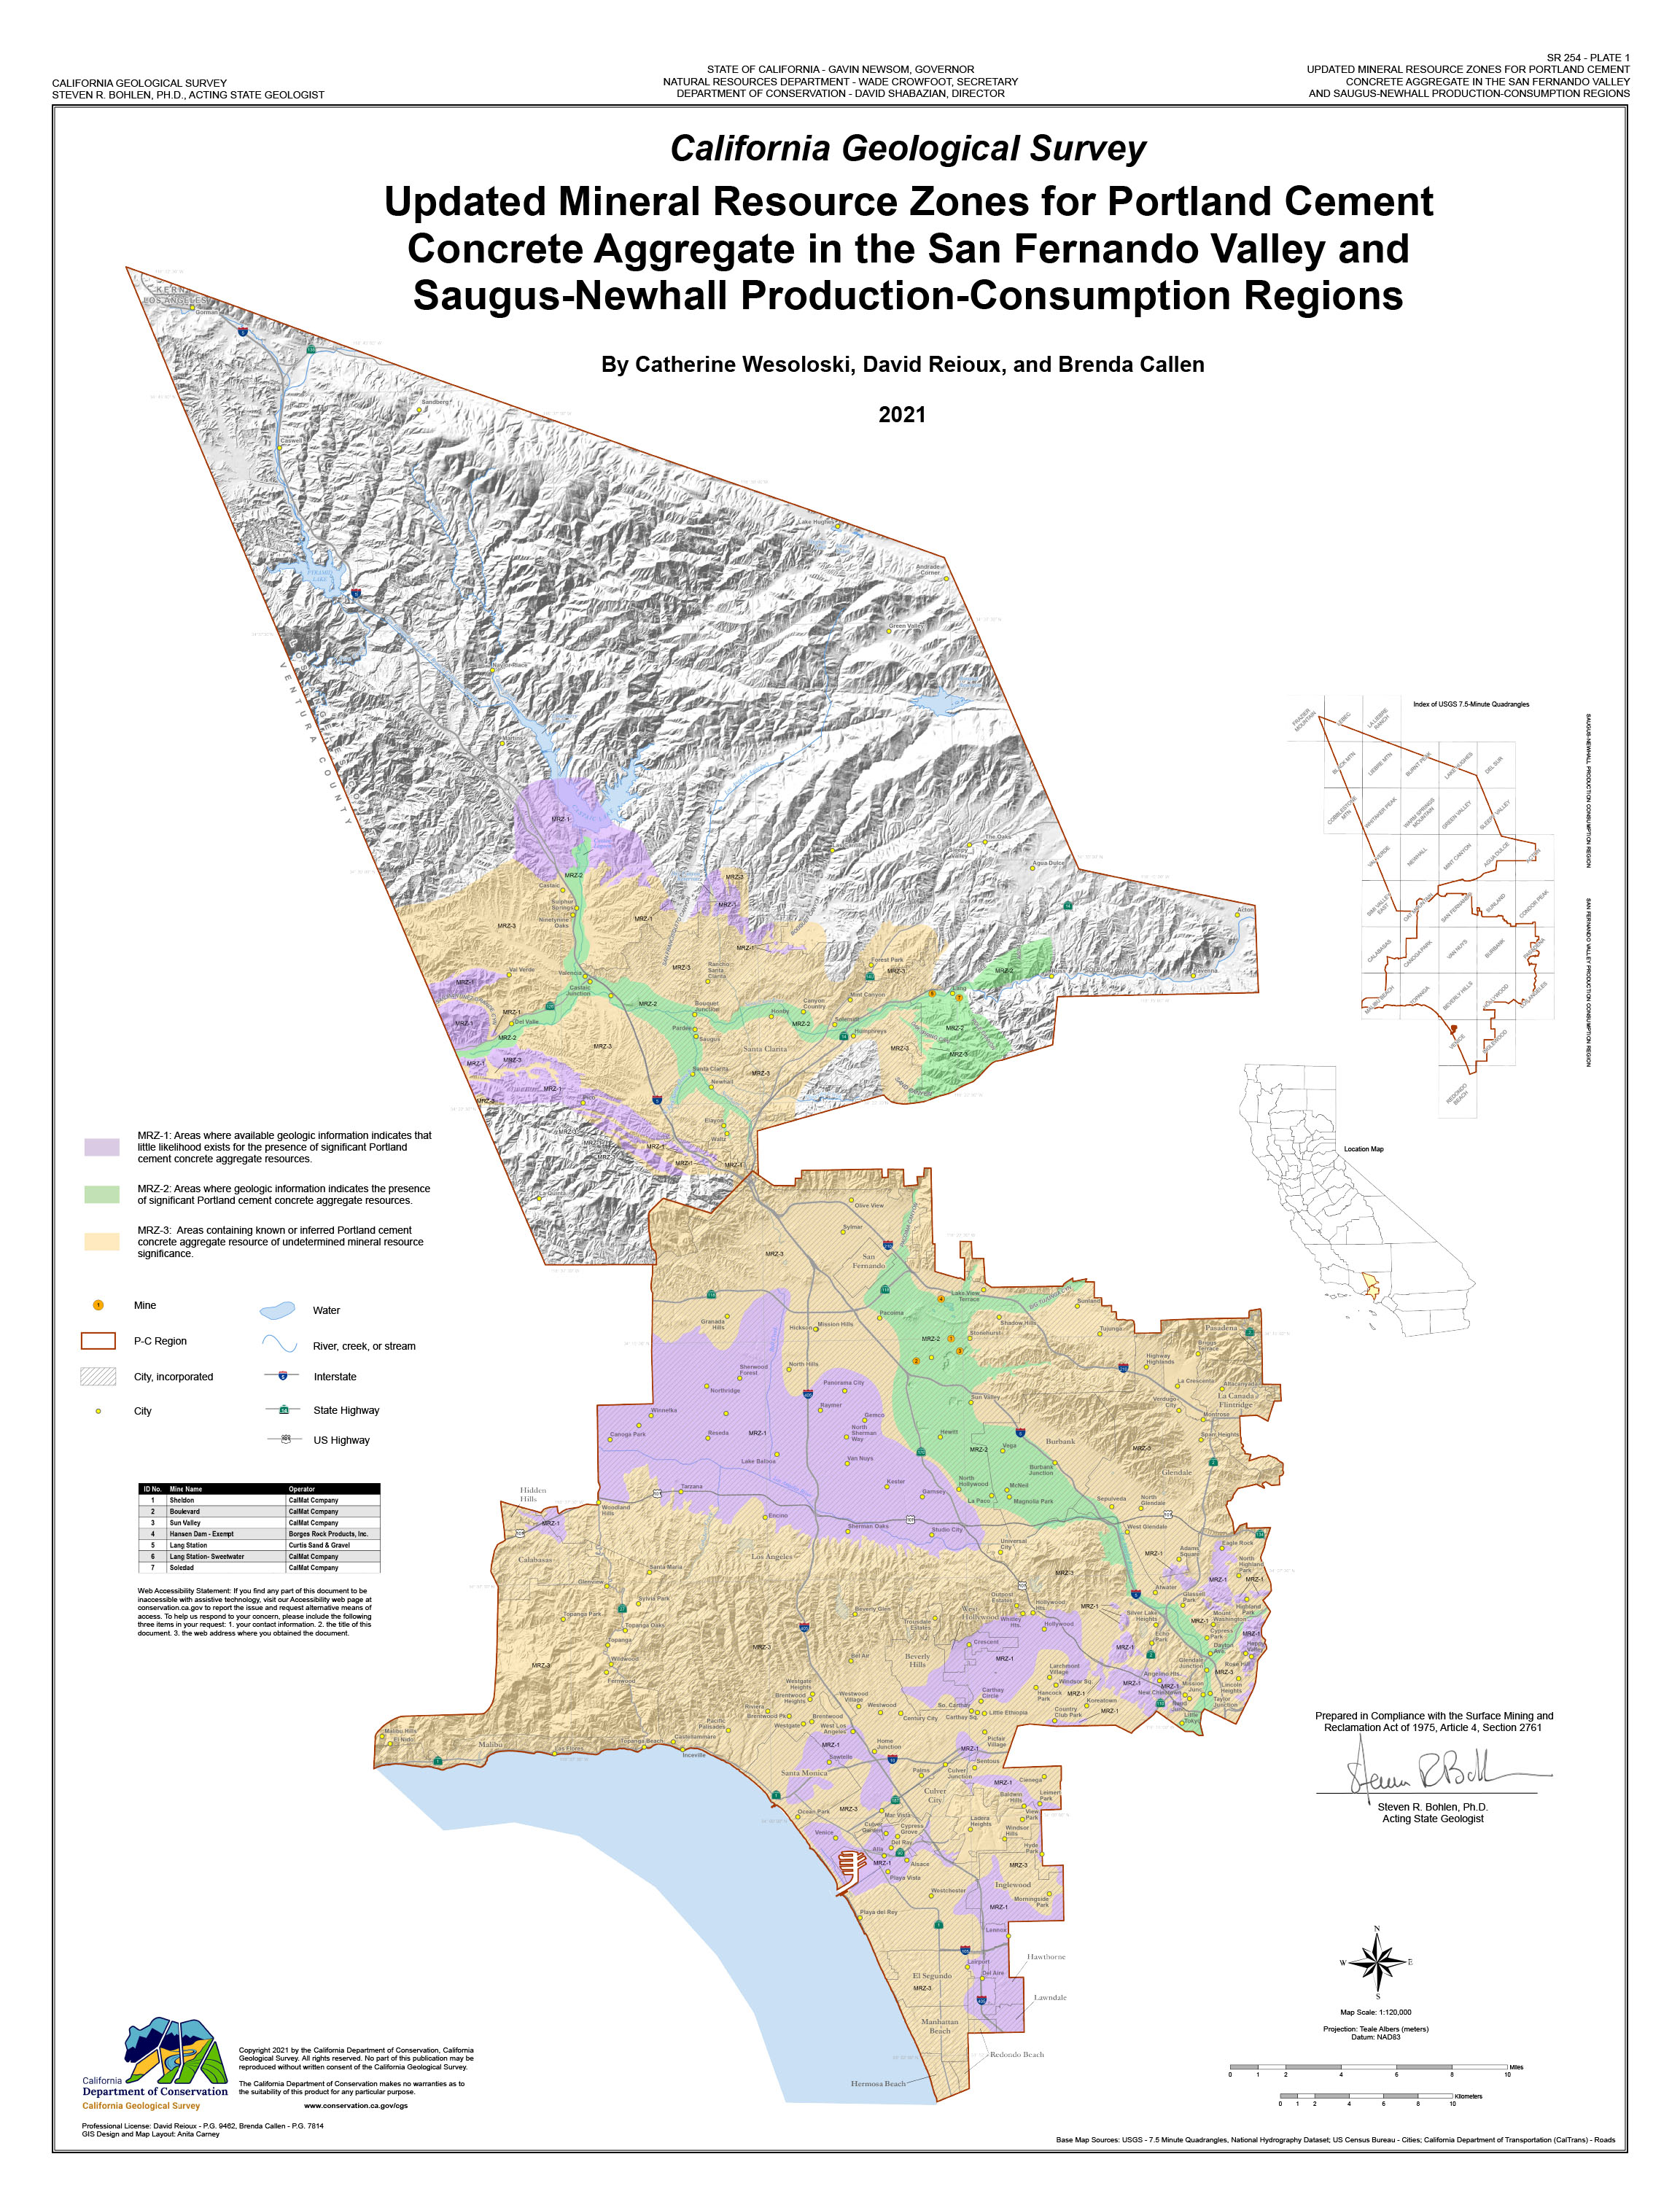 Thumbnail image of SR 254 Plate 1, map of San Fernando Valley and Saugus-Newhall Mineral Resource Zones.